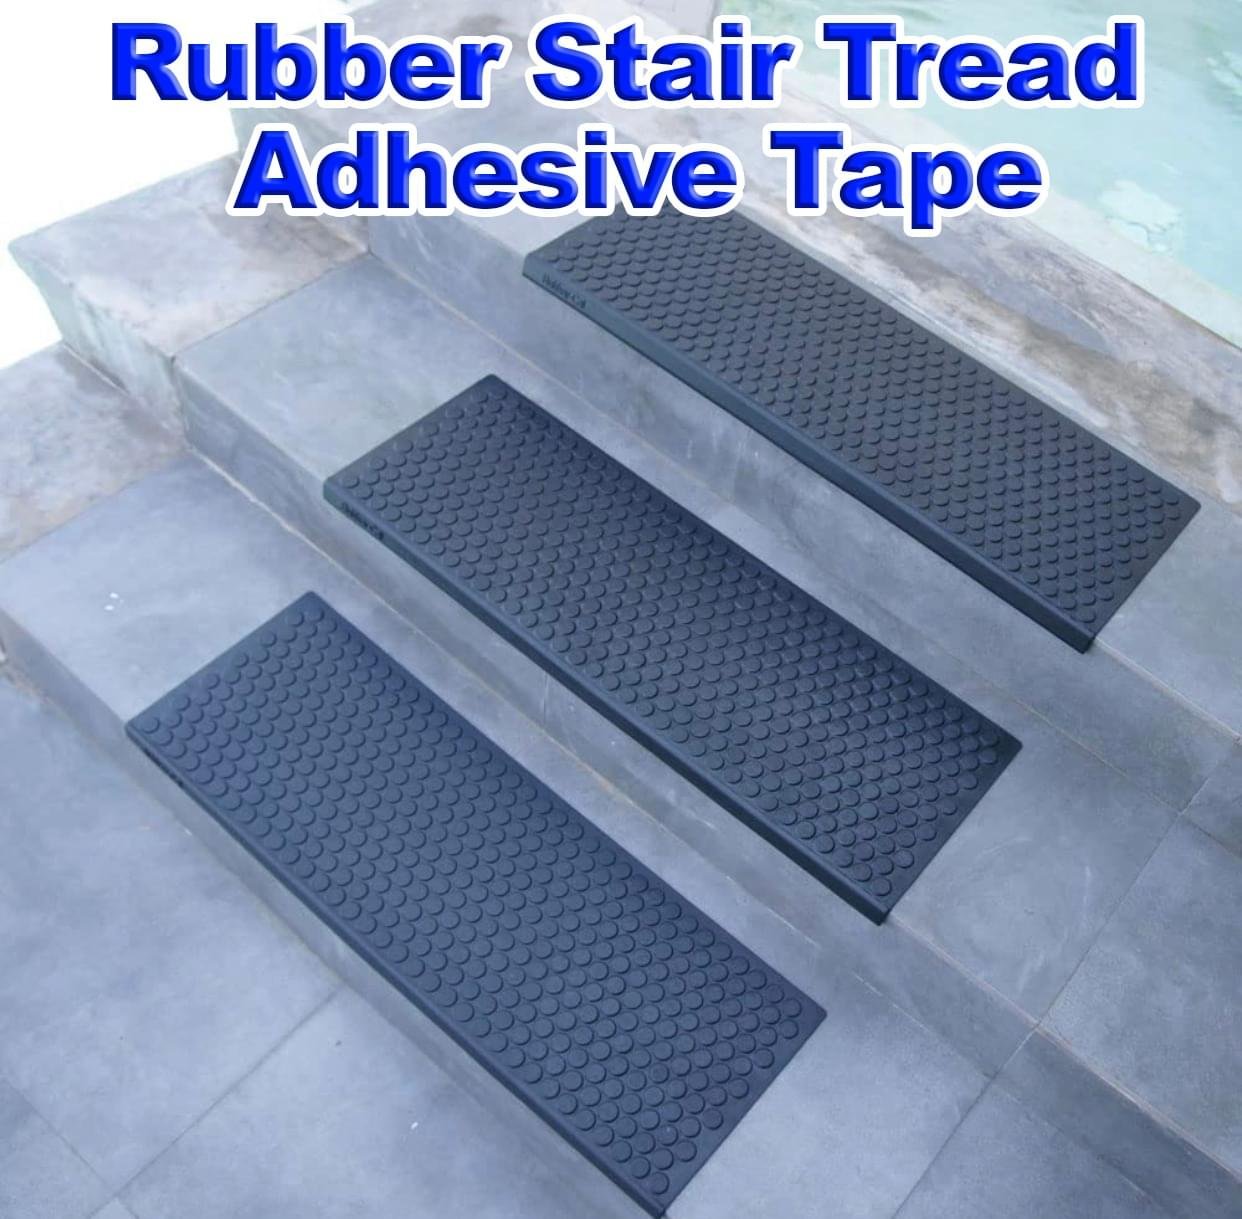 Rubber Stair Tread Adhesive Tape